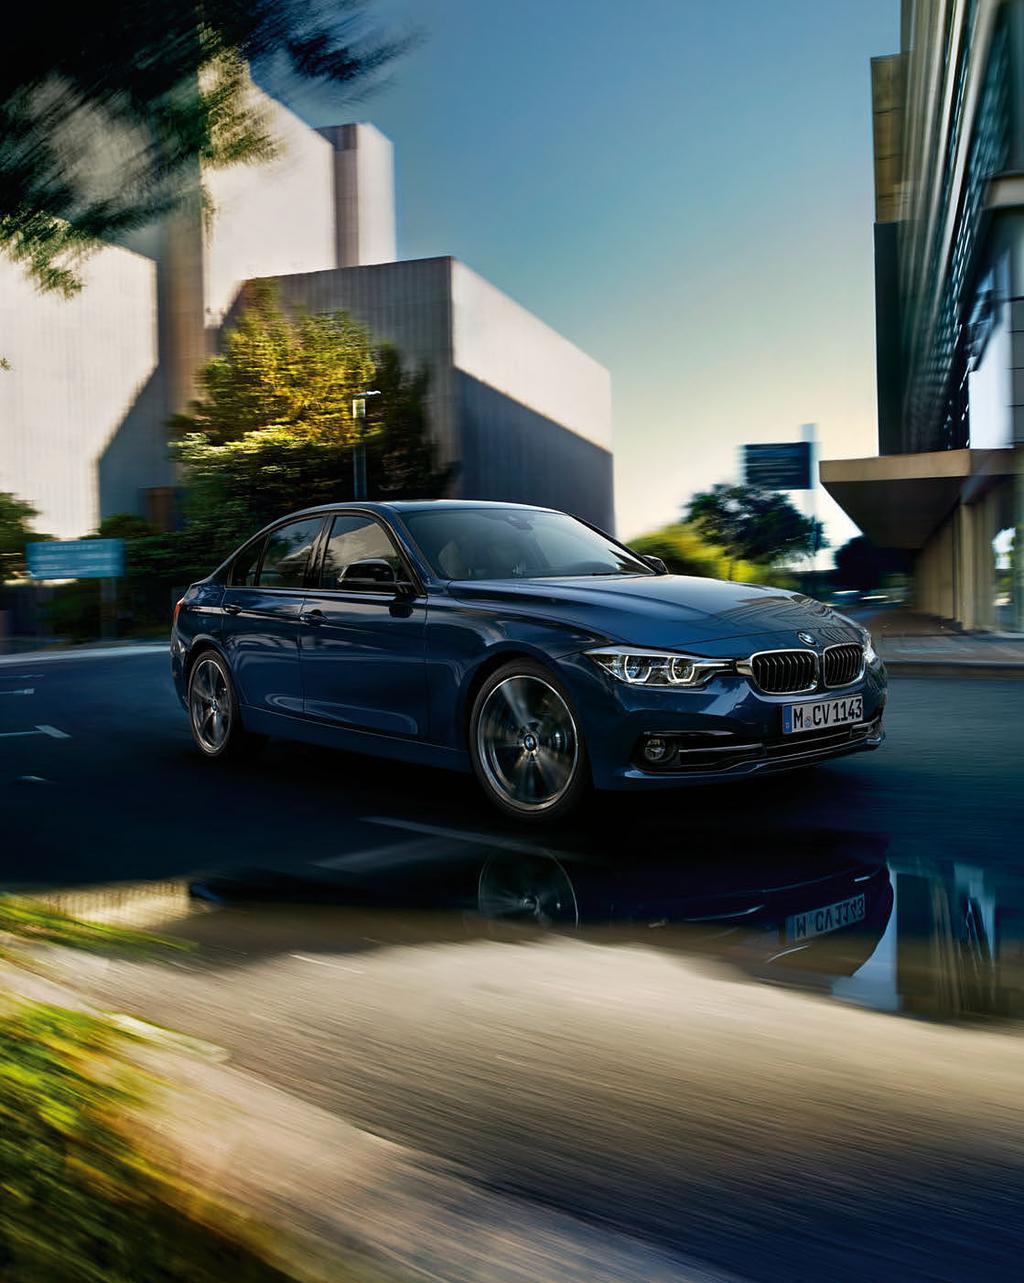 The driving experience is convincing from the get-go: at 240 kw (326 hp), the TwinPower Turbo engine in the BMW 340i, mated to the 8-speed